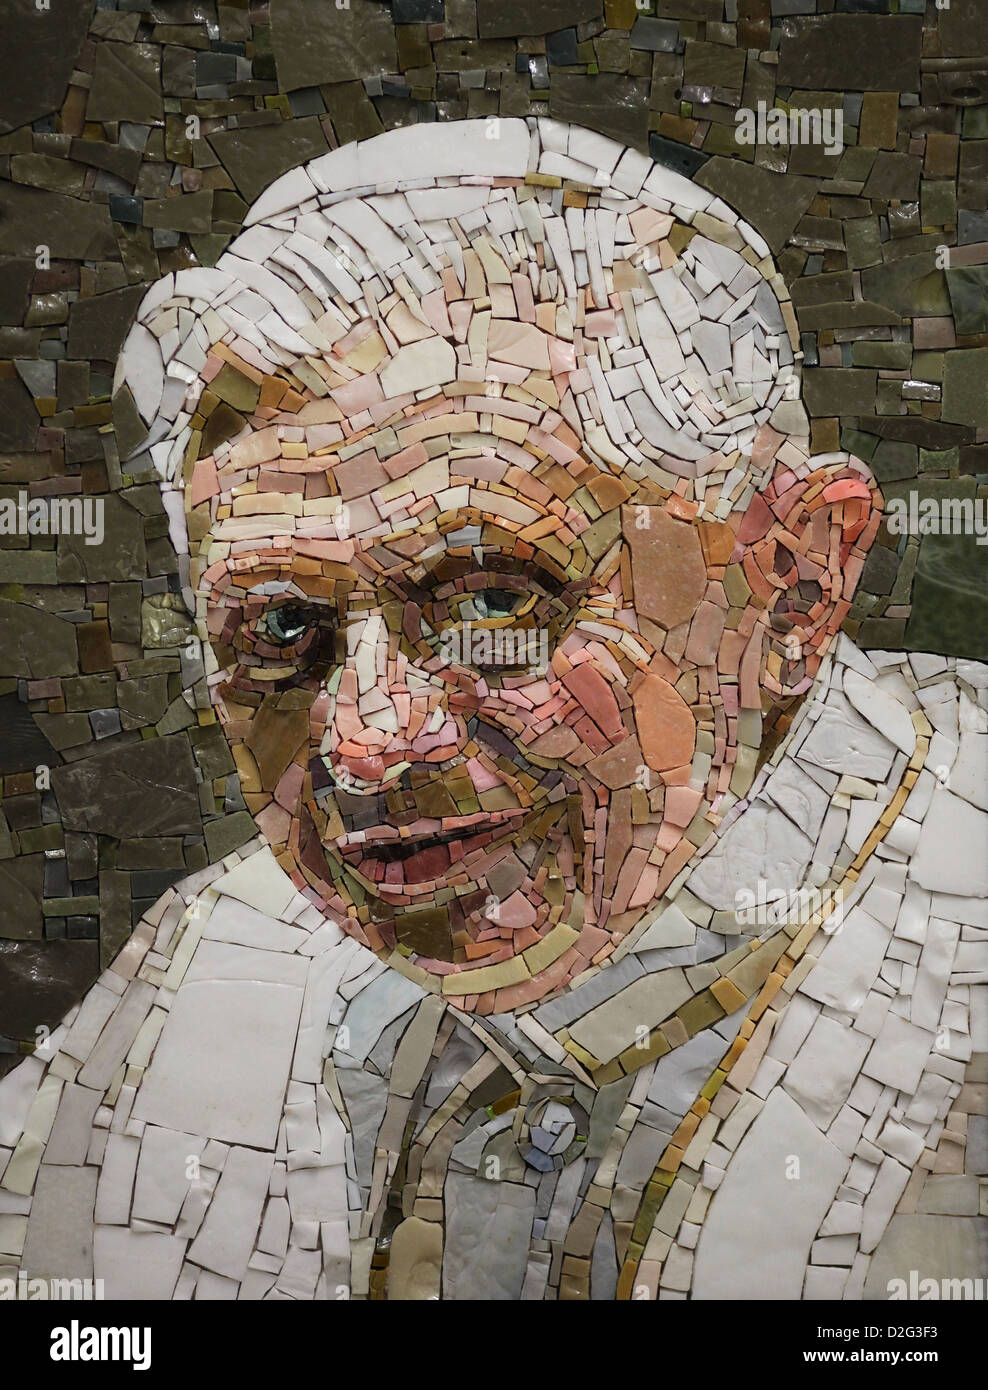 Mosaic of Pope Benedict XVI (Joseph Aloisius Ratzinger), Sovereign of the Vatican City State and leader of the Catholic Church. Stock Photo